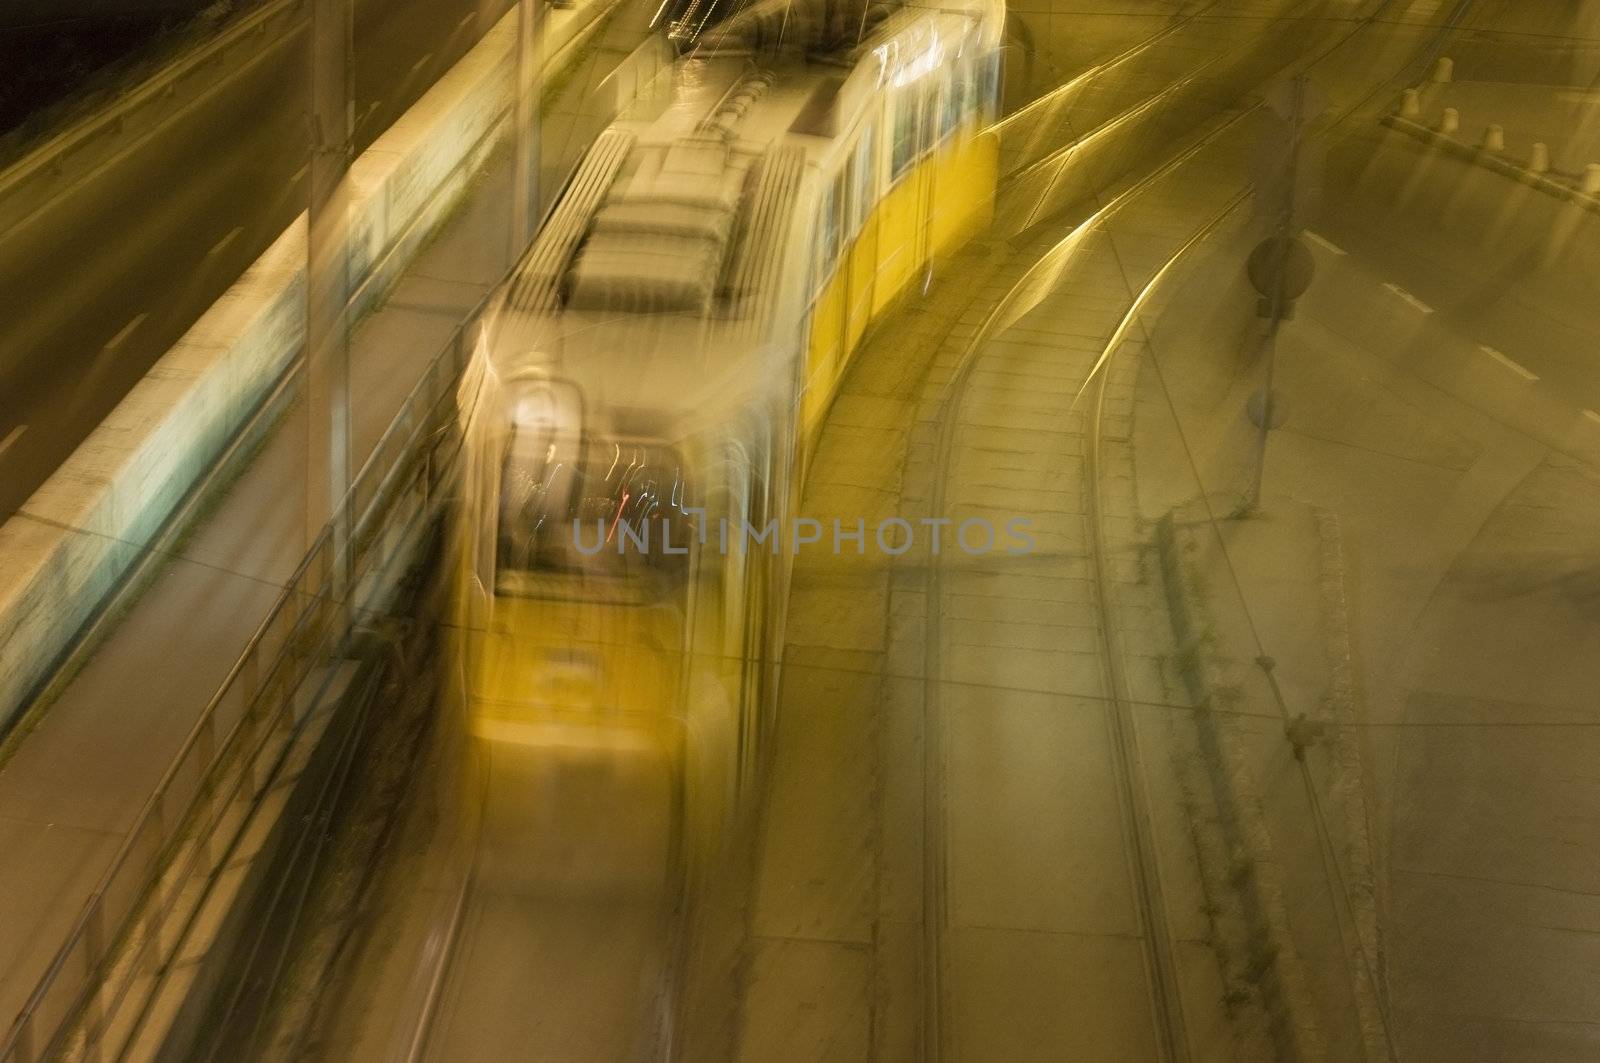 Night tram in motion blur at Budapest, Hungary